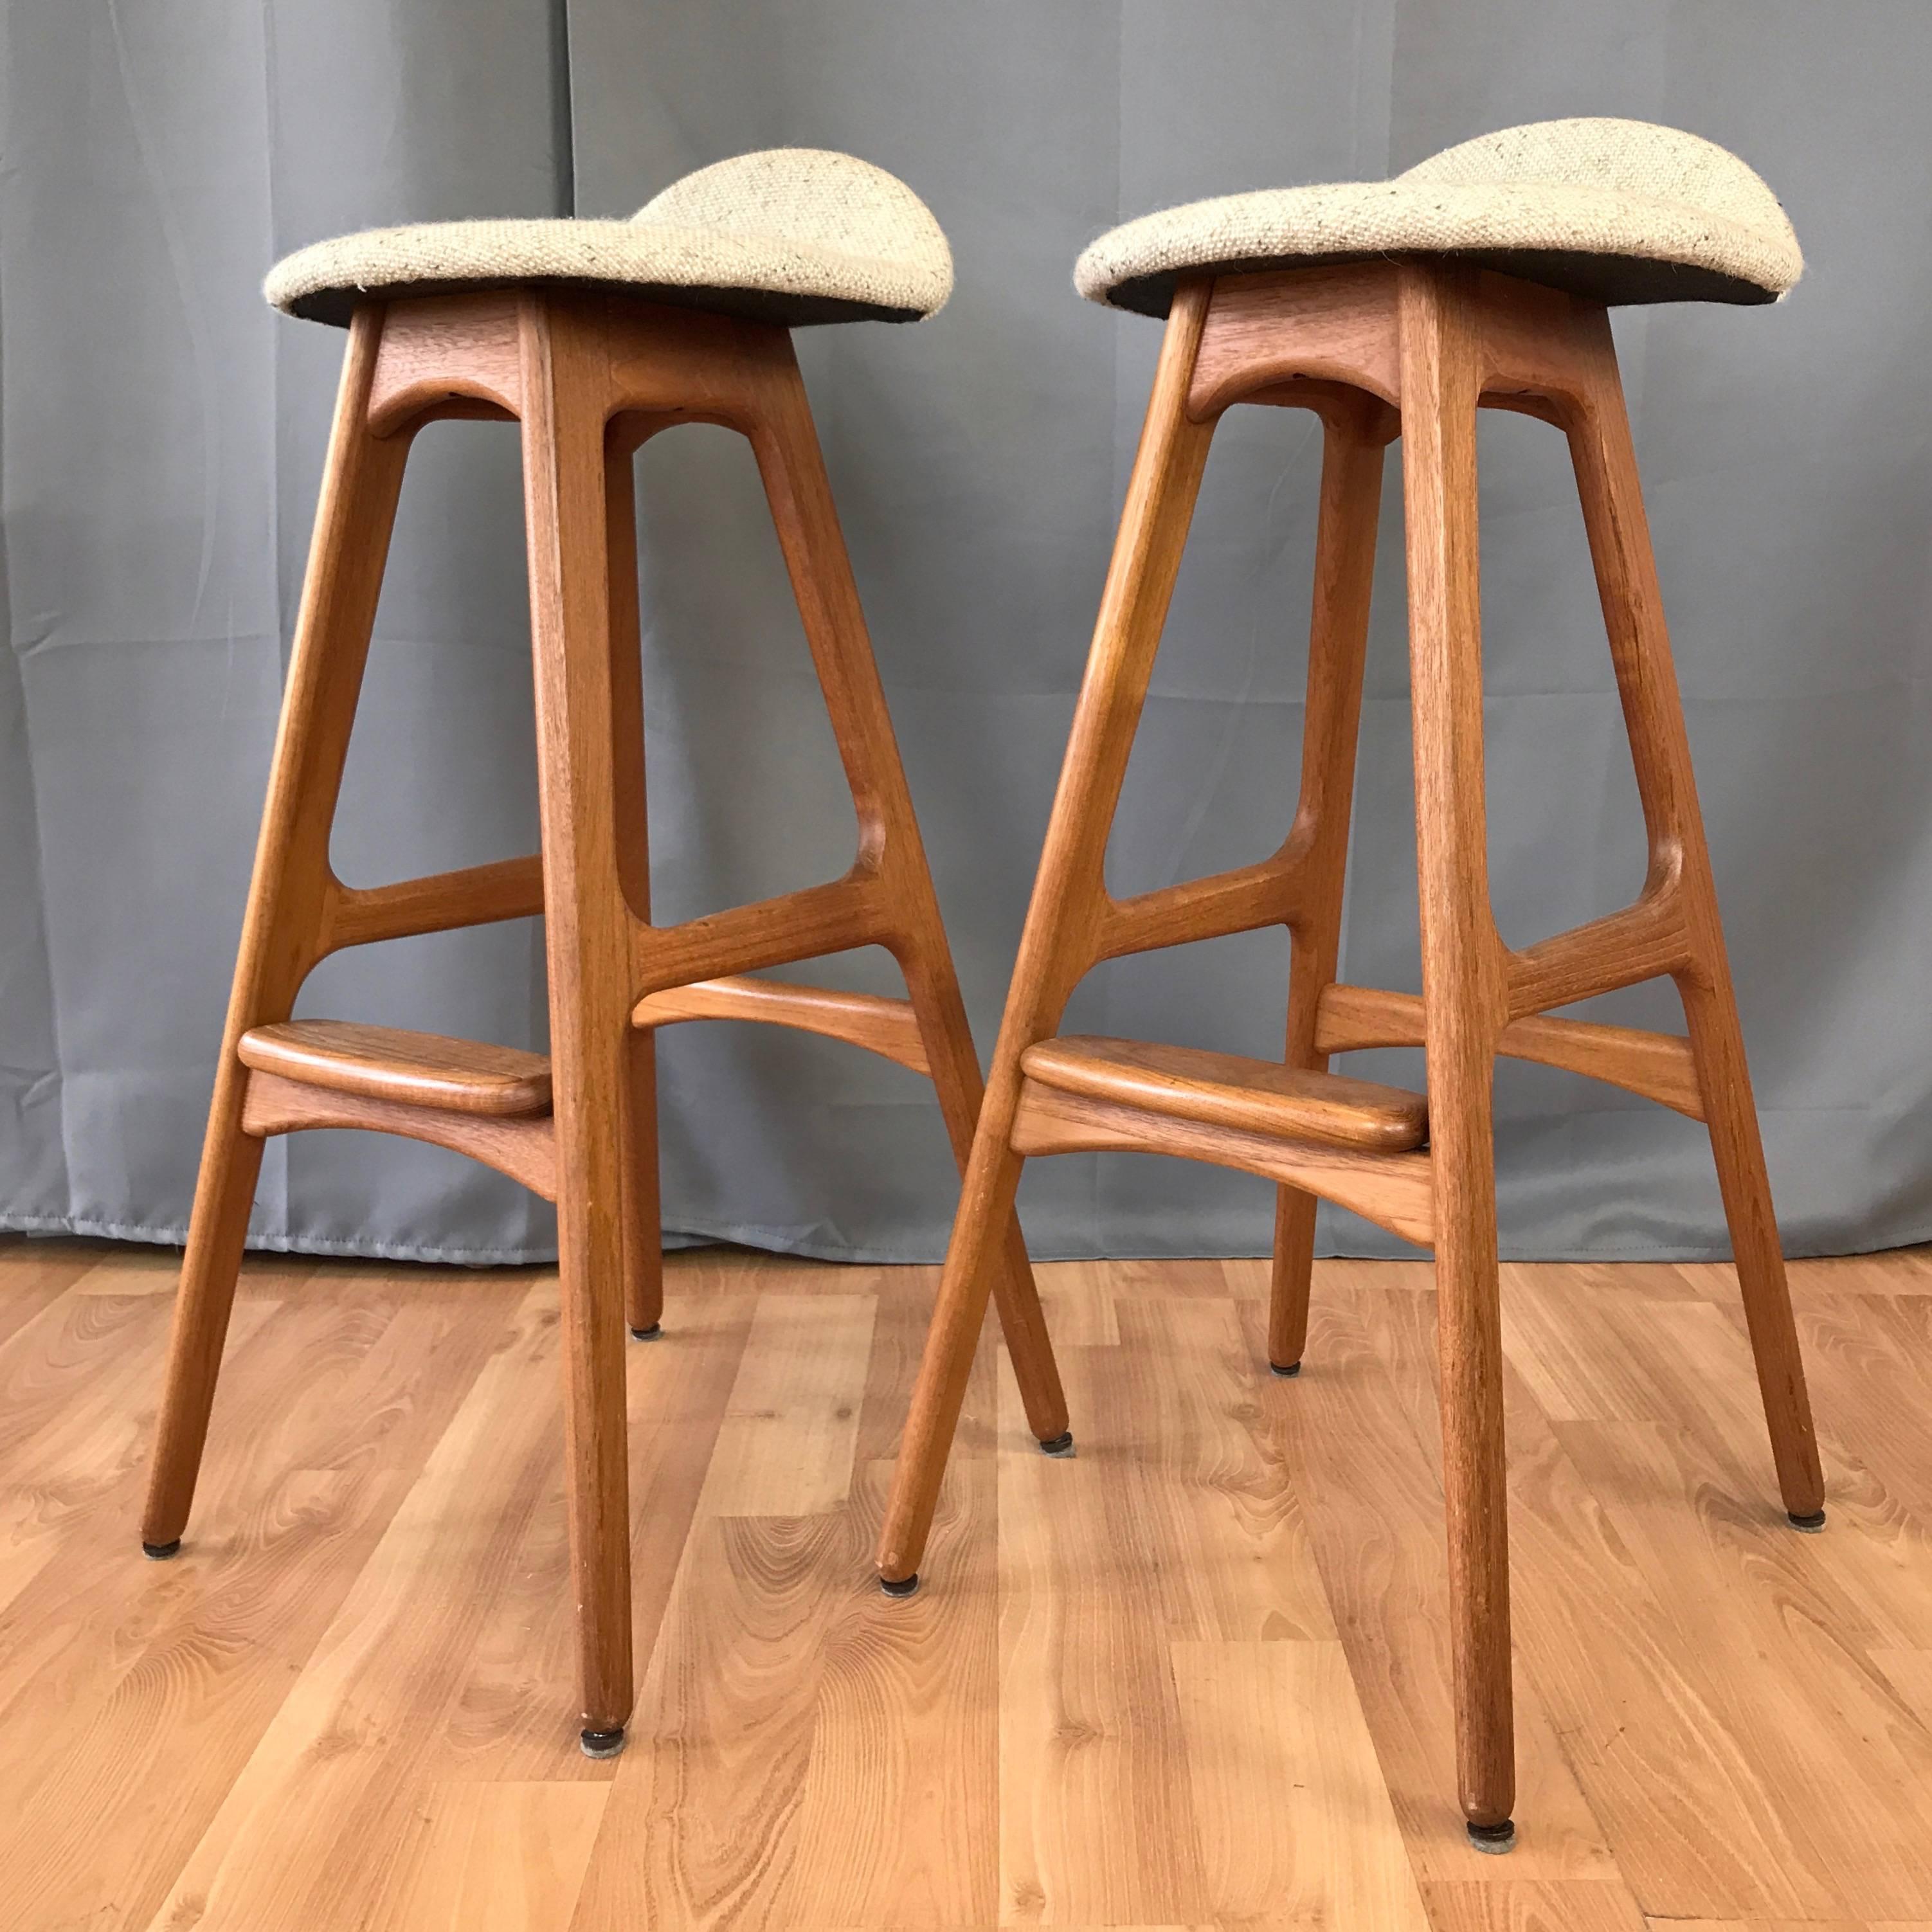 A pair of model OD-61 teak bar stools by Erik Buch for Oddense Maskinsnedkeri. 

Iconic Danish modern design with architectural lines in smoothly sculpted solid teak. Sleek seat retains its original flecked oatmeal heavy weight wool custom